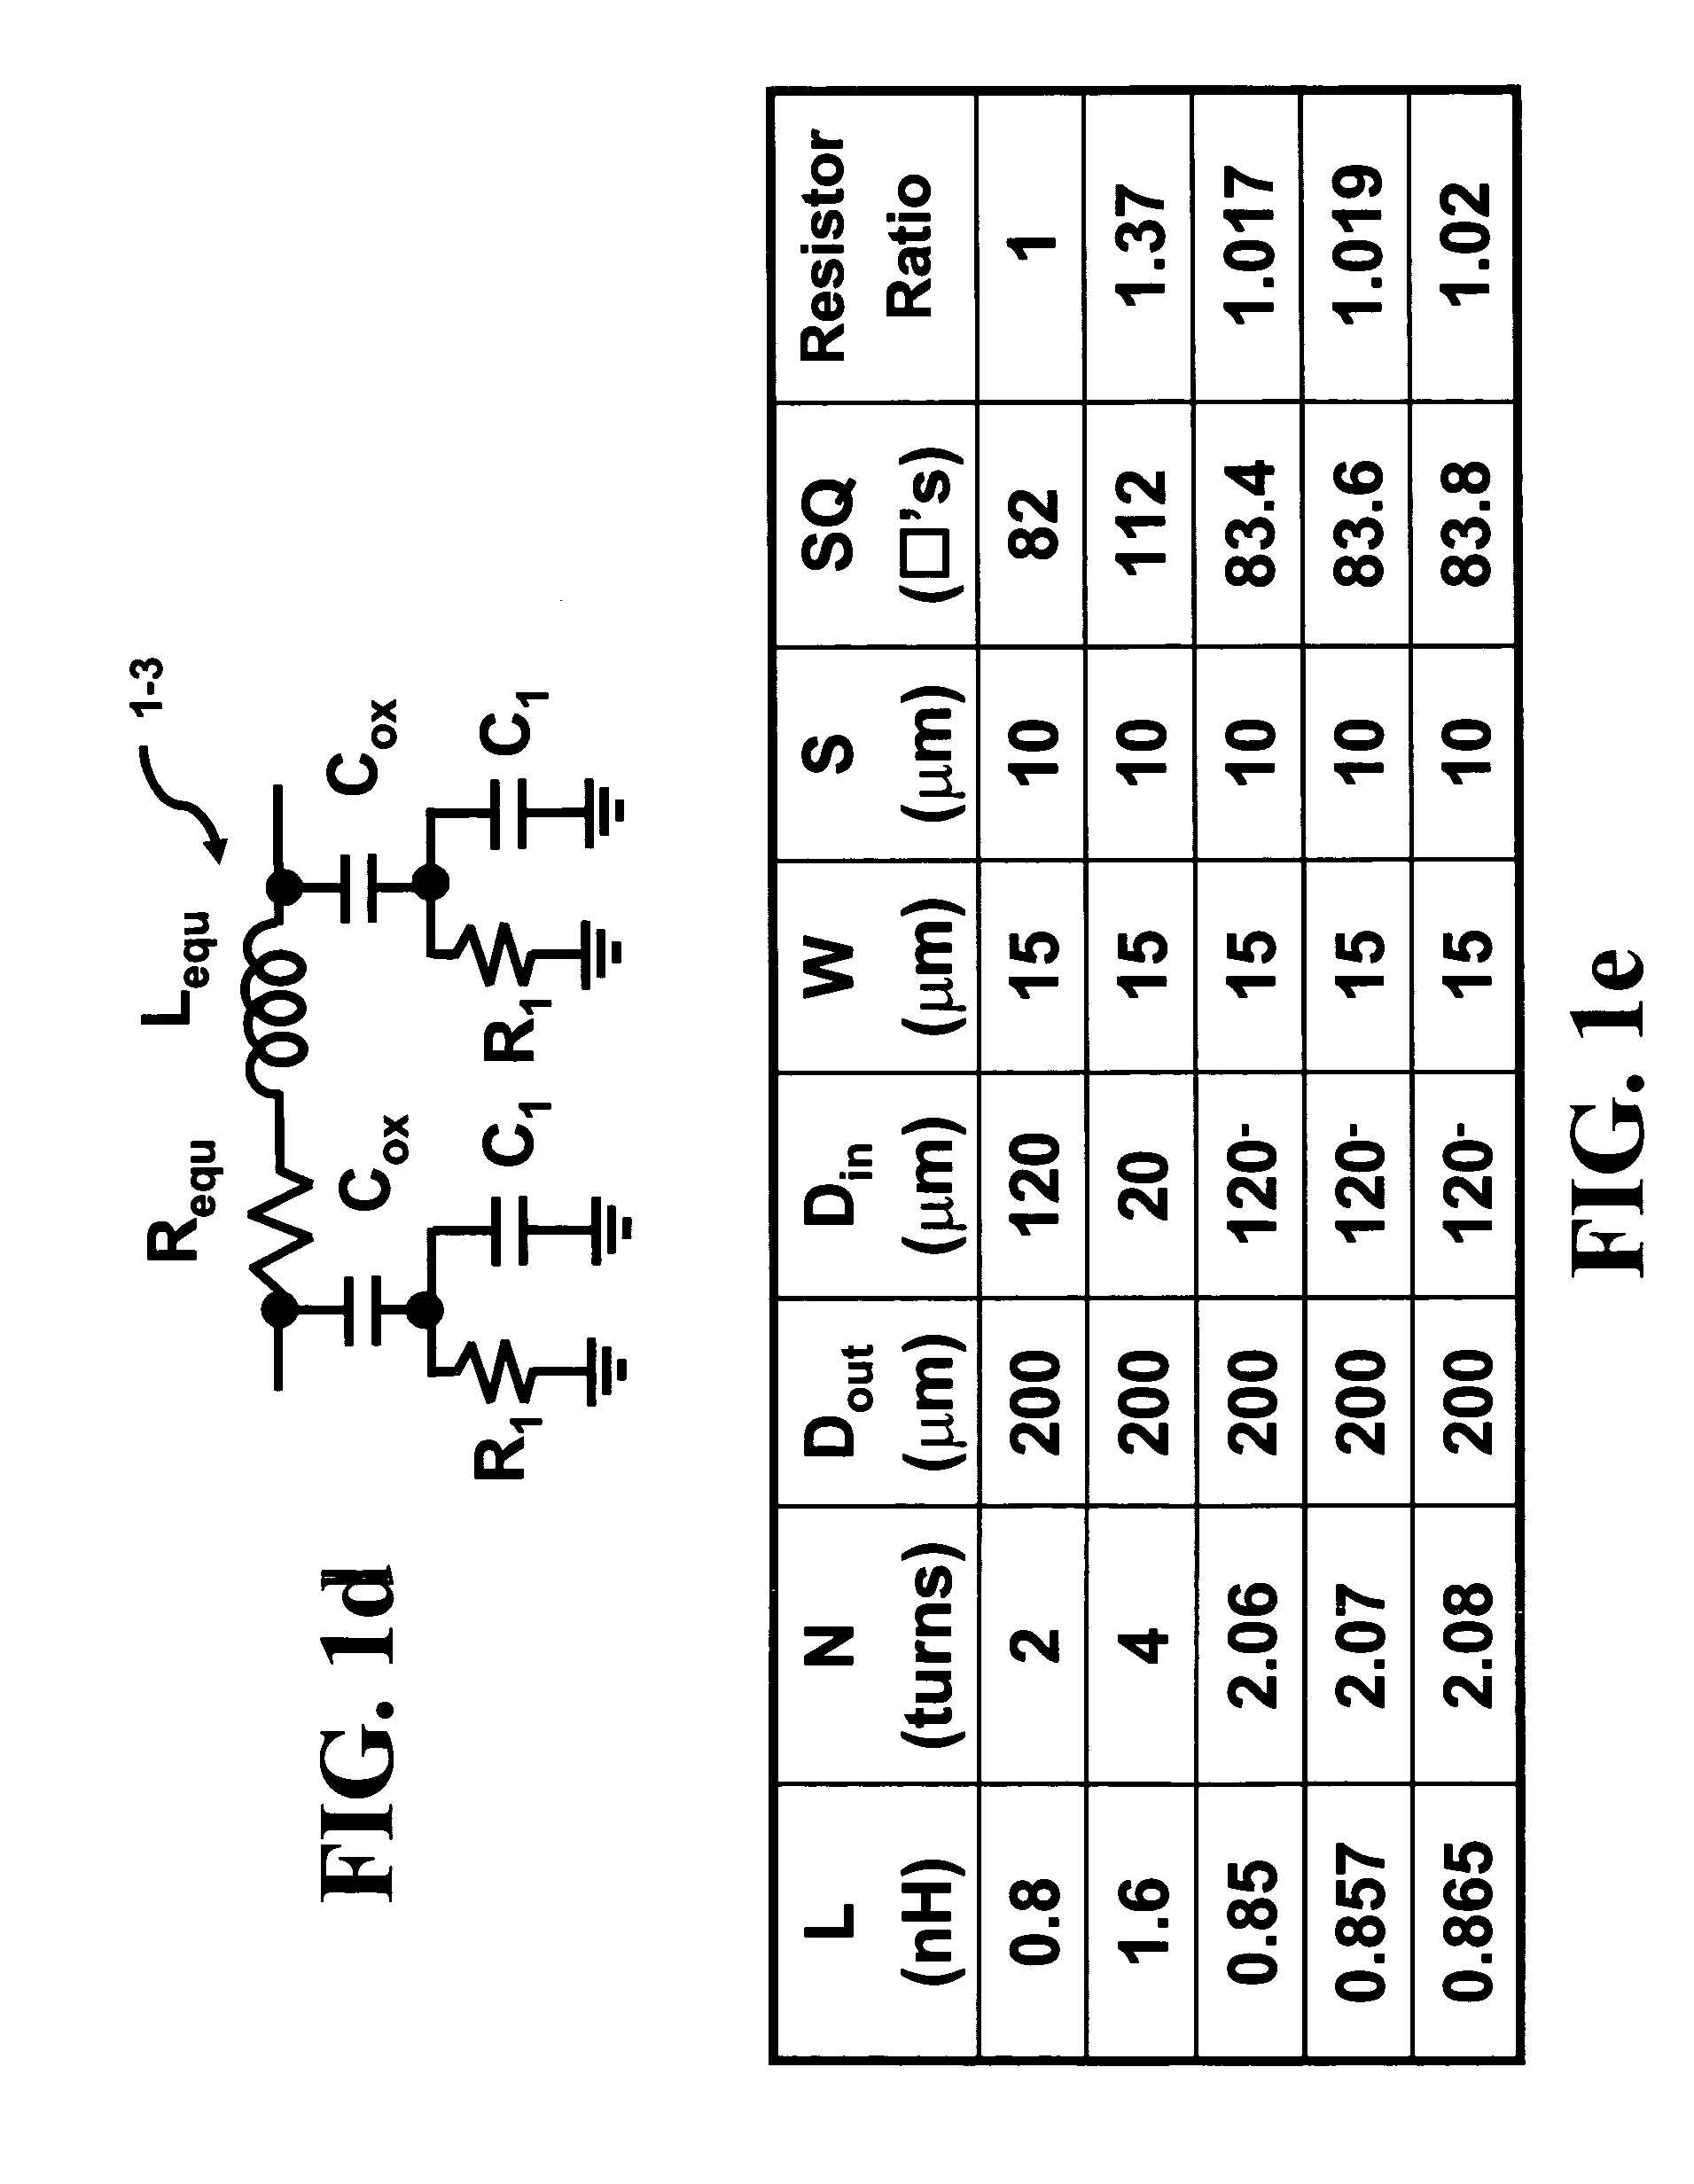 Mutual inductance in transformer based tank circuitry